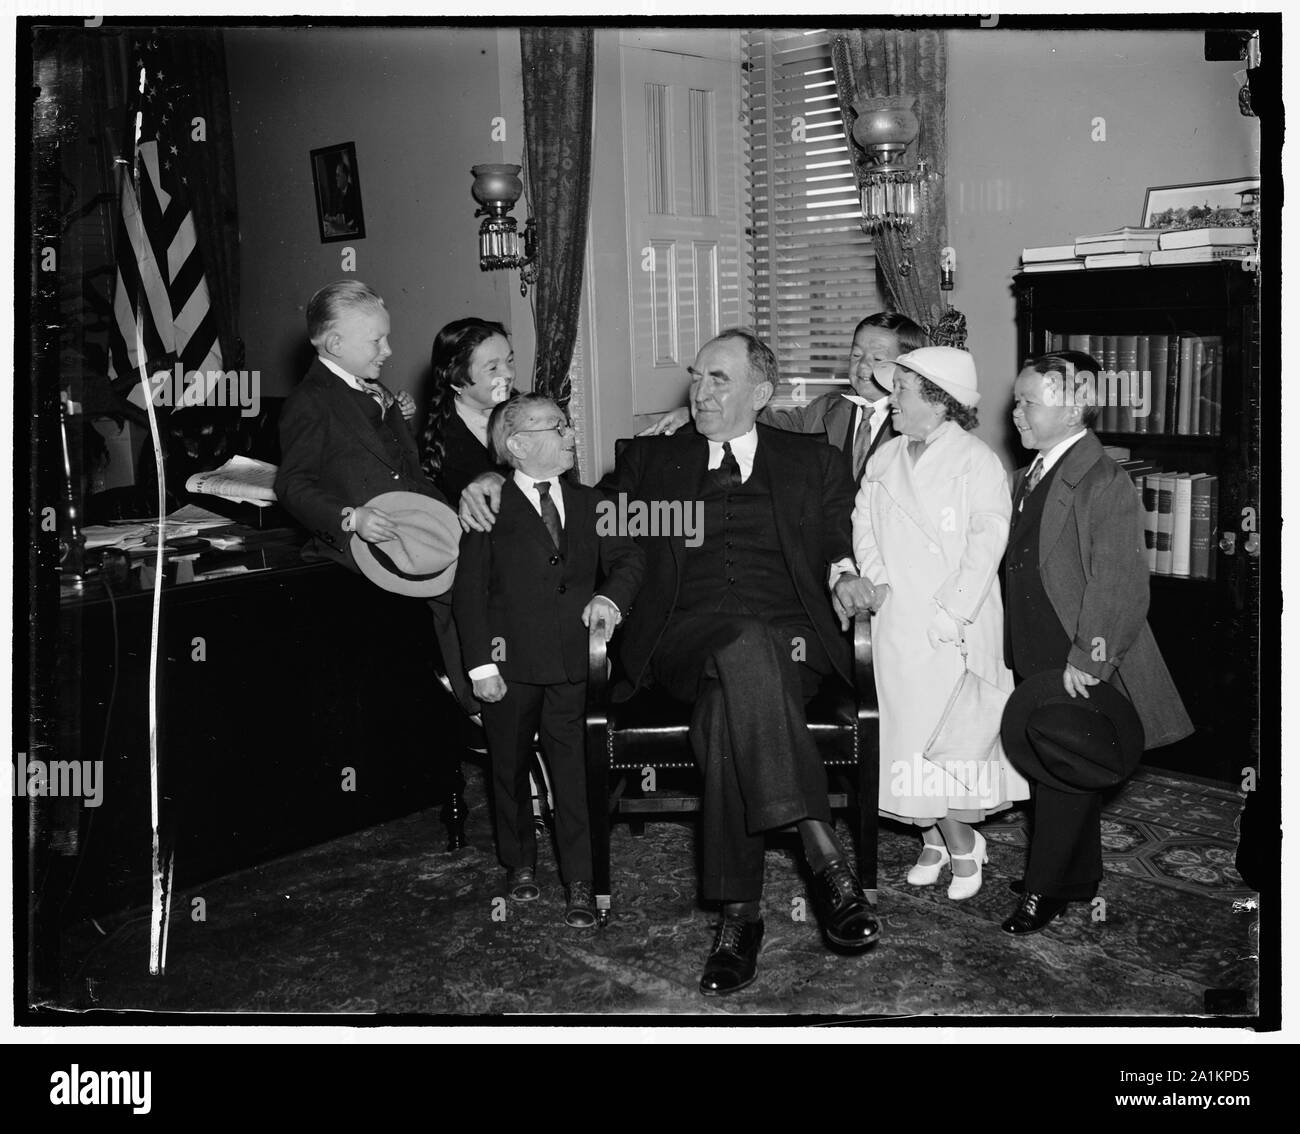 No midget lap-sitting for Speaker Bankhead. Washington, D.C., April 30. Lap-sitting is out Speaker Bankhead today as he greeted a troupe of circus midgets from his home state of Alabama [at the] Capitol. An enterprising photographer sought to repeat the J.P. Morgan act of a few years ago (?) the noted financier placed on the midgets on [his] lap at a Senate hearing. But it was no go today as the Speaker was concerned, 4/30/37 Stock Photo